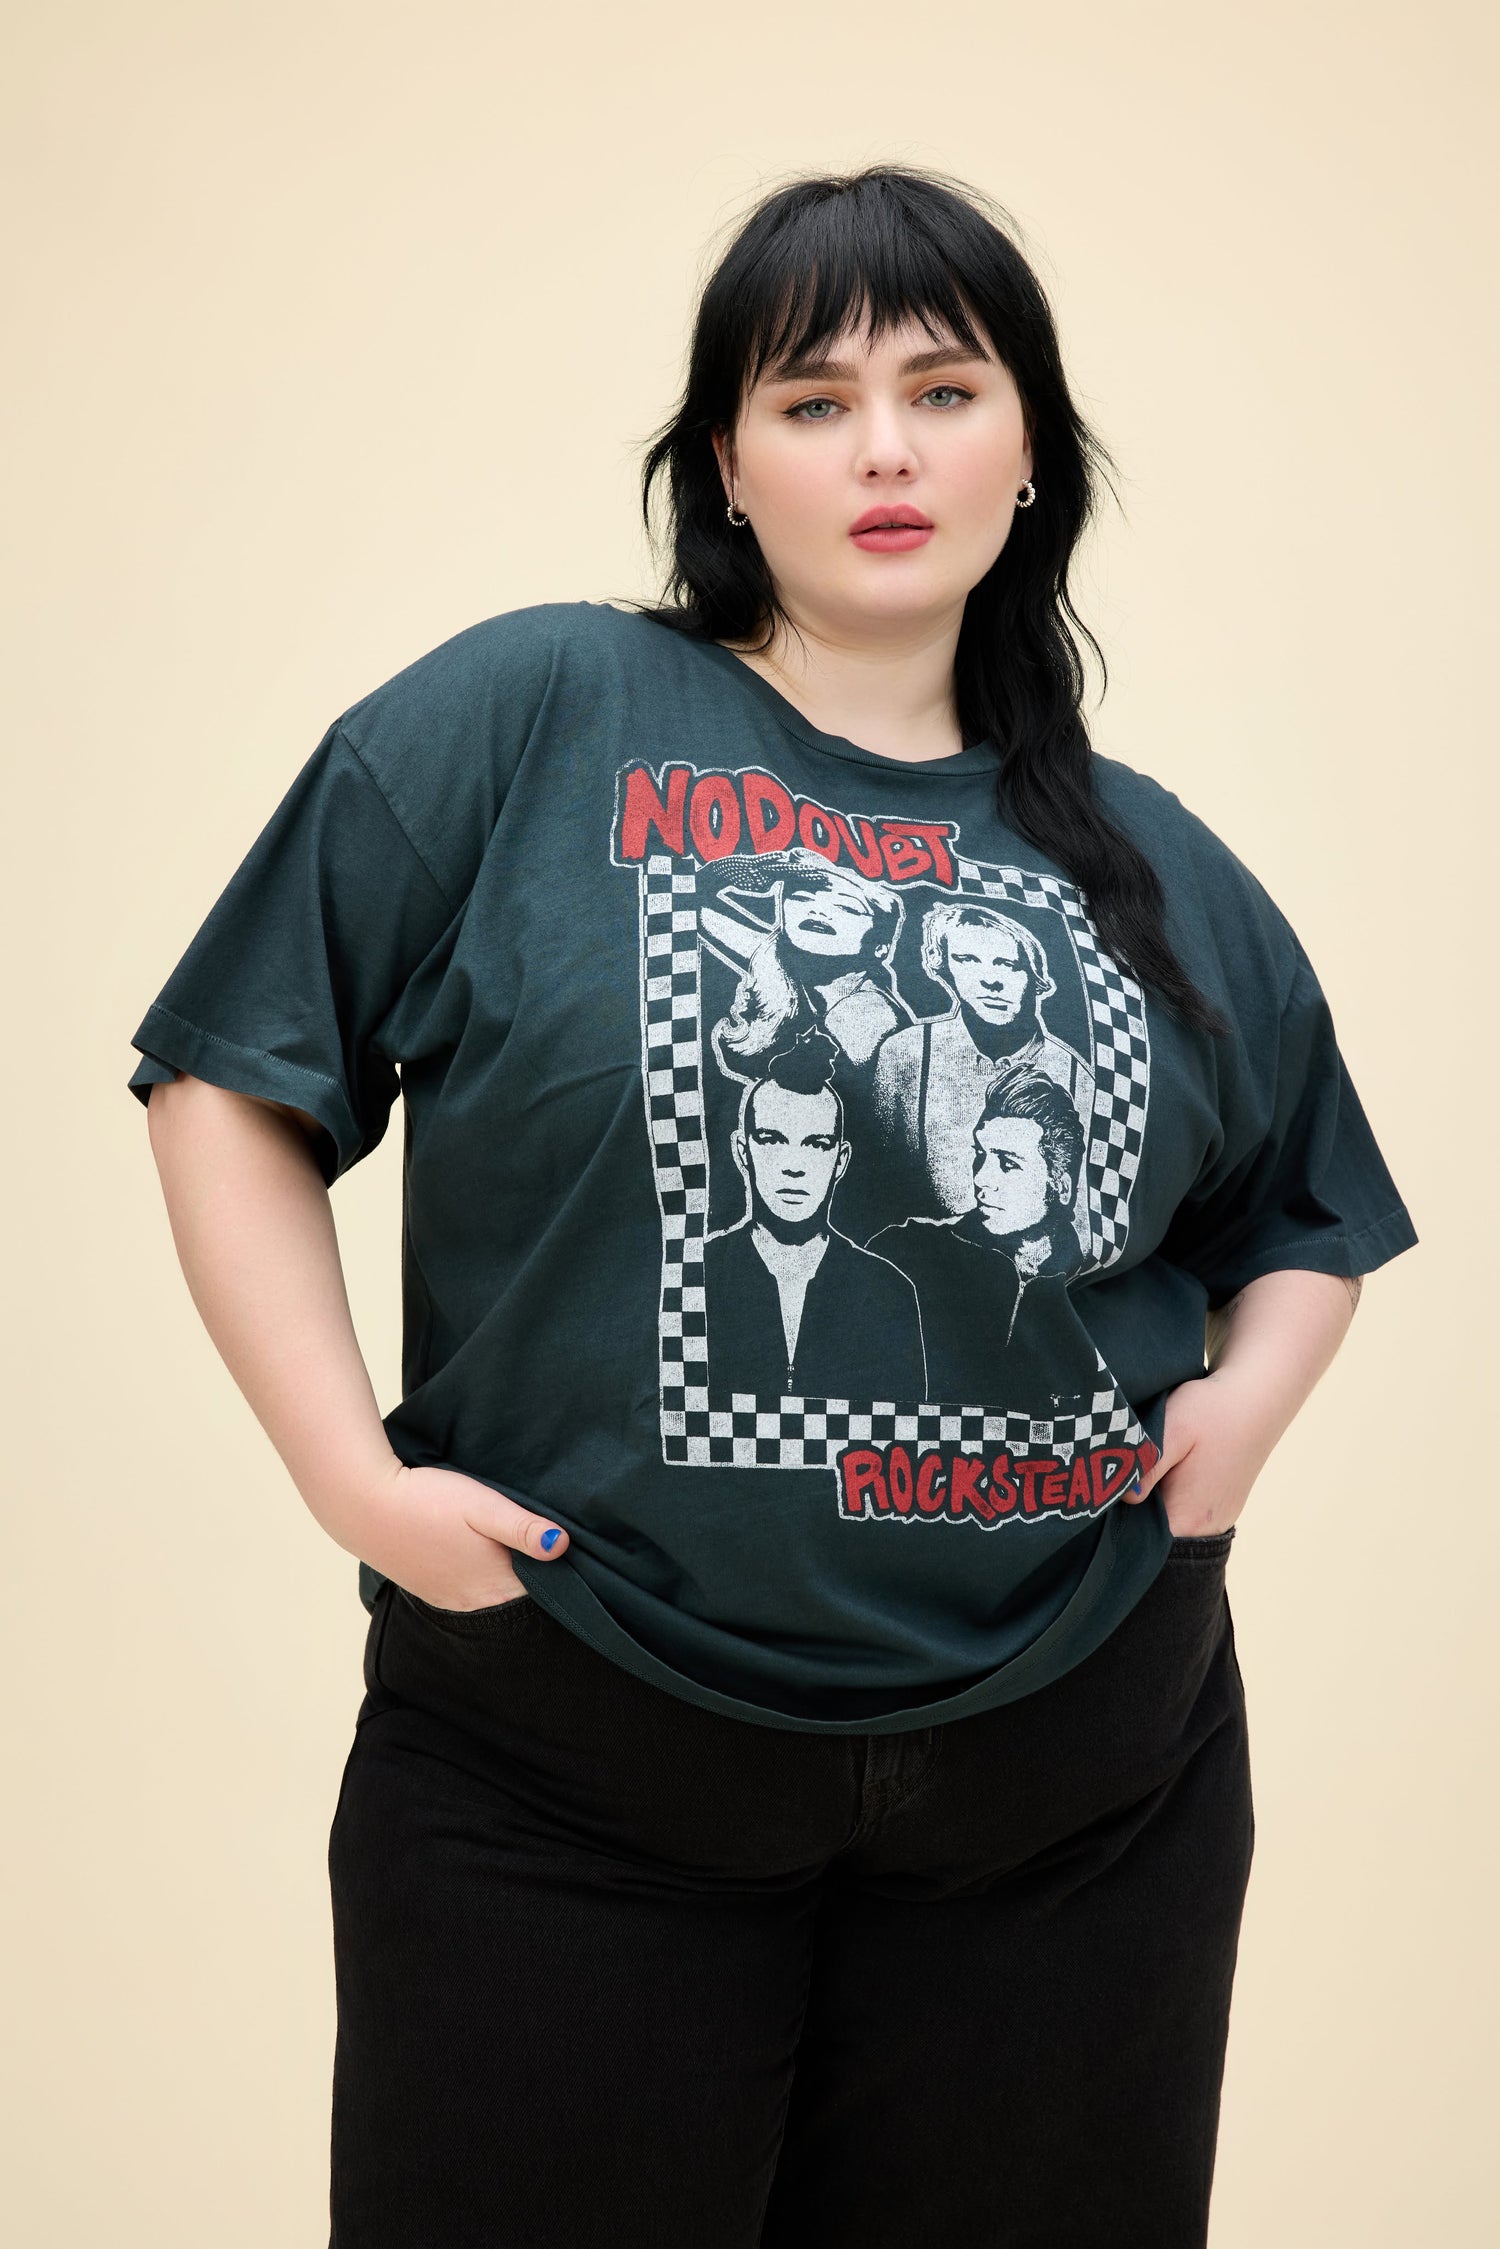 A model featuring a black plus size merch tee design with a group photo of the No Doubt band.